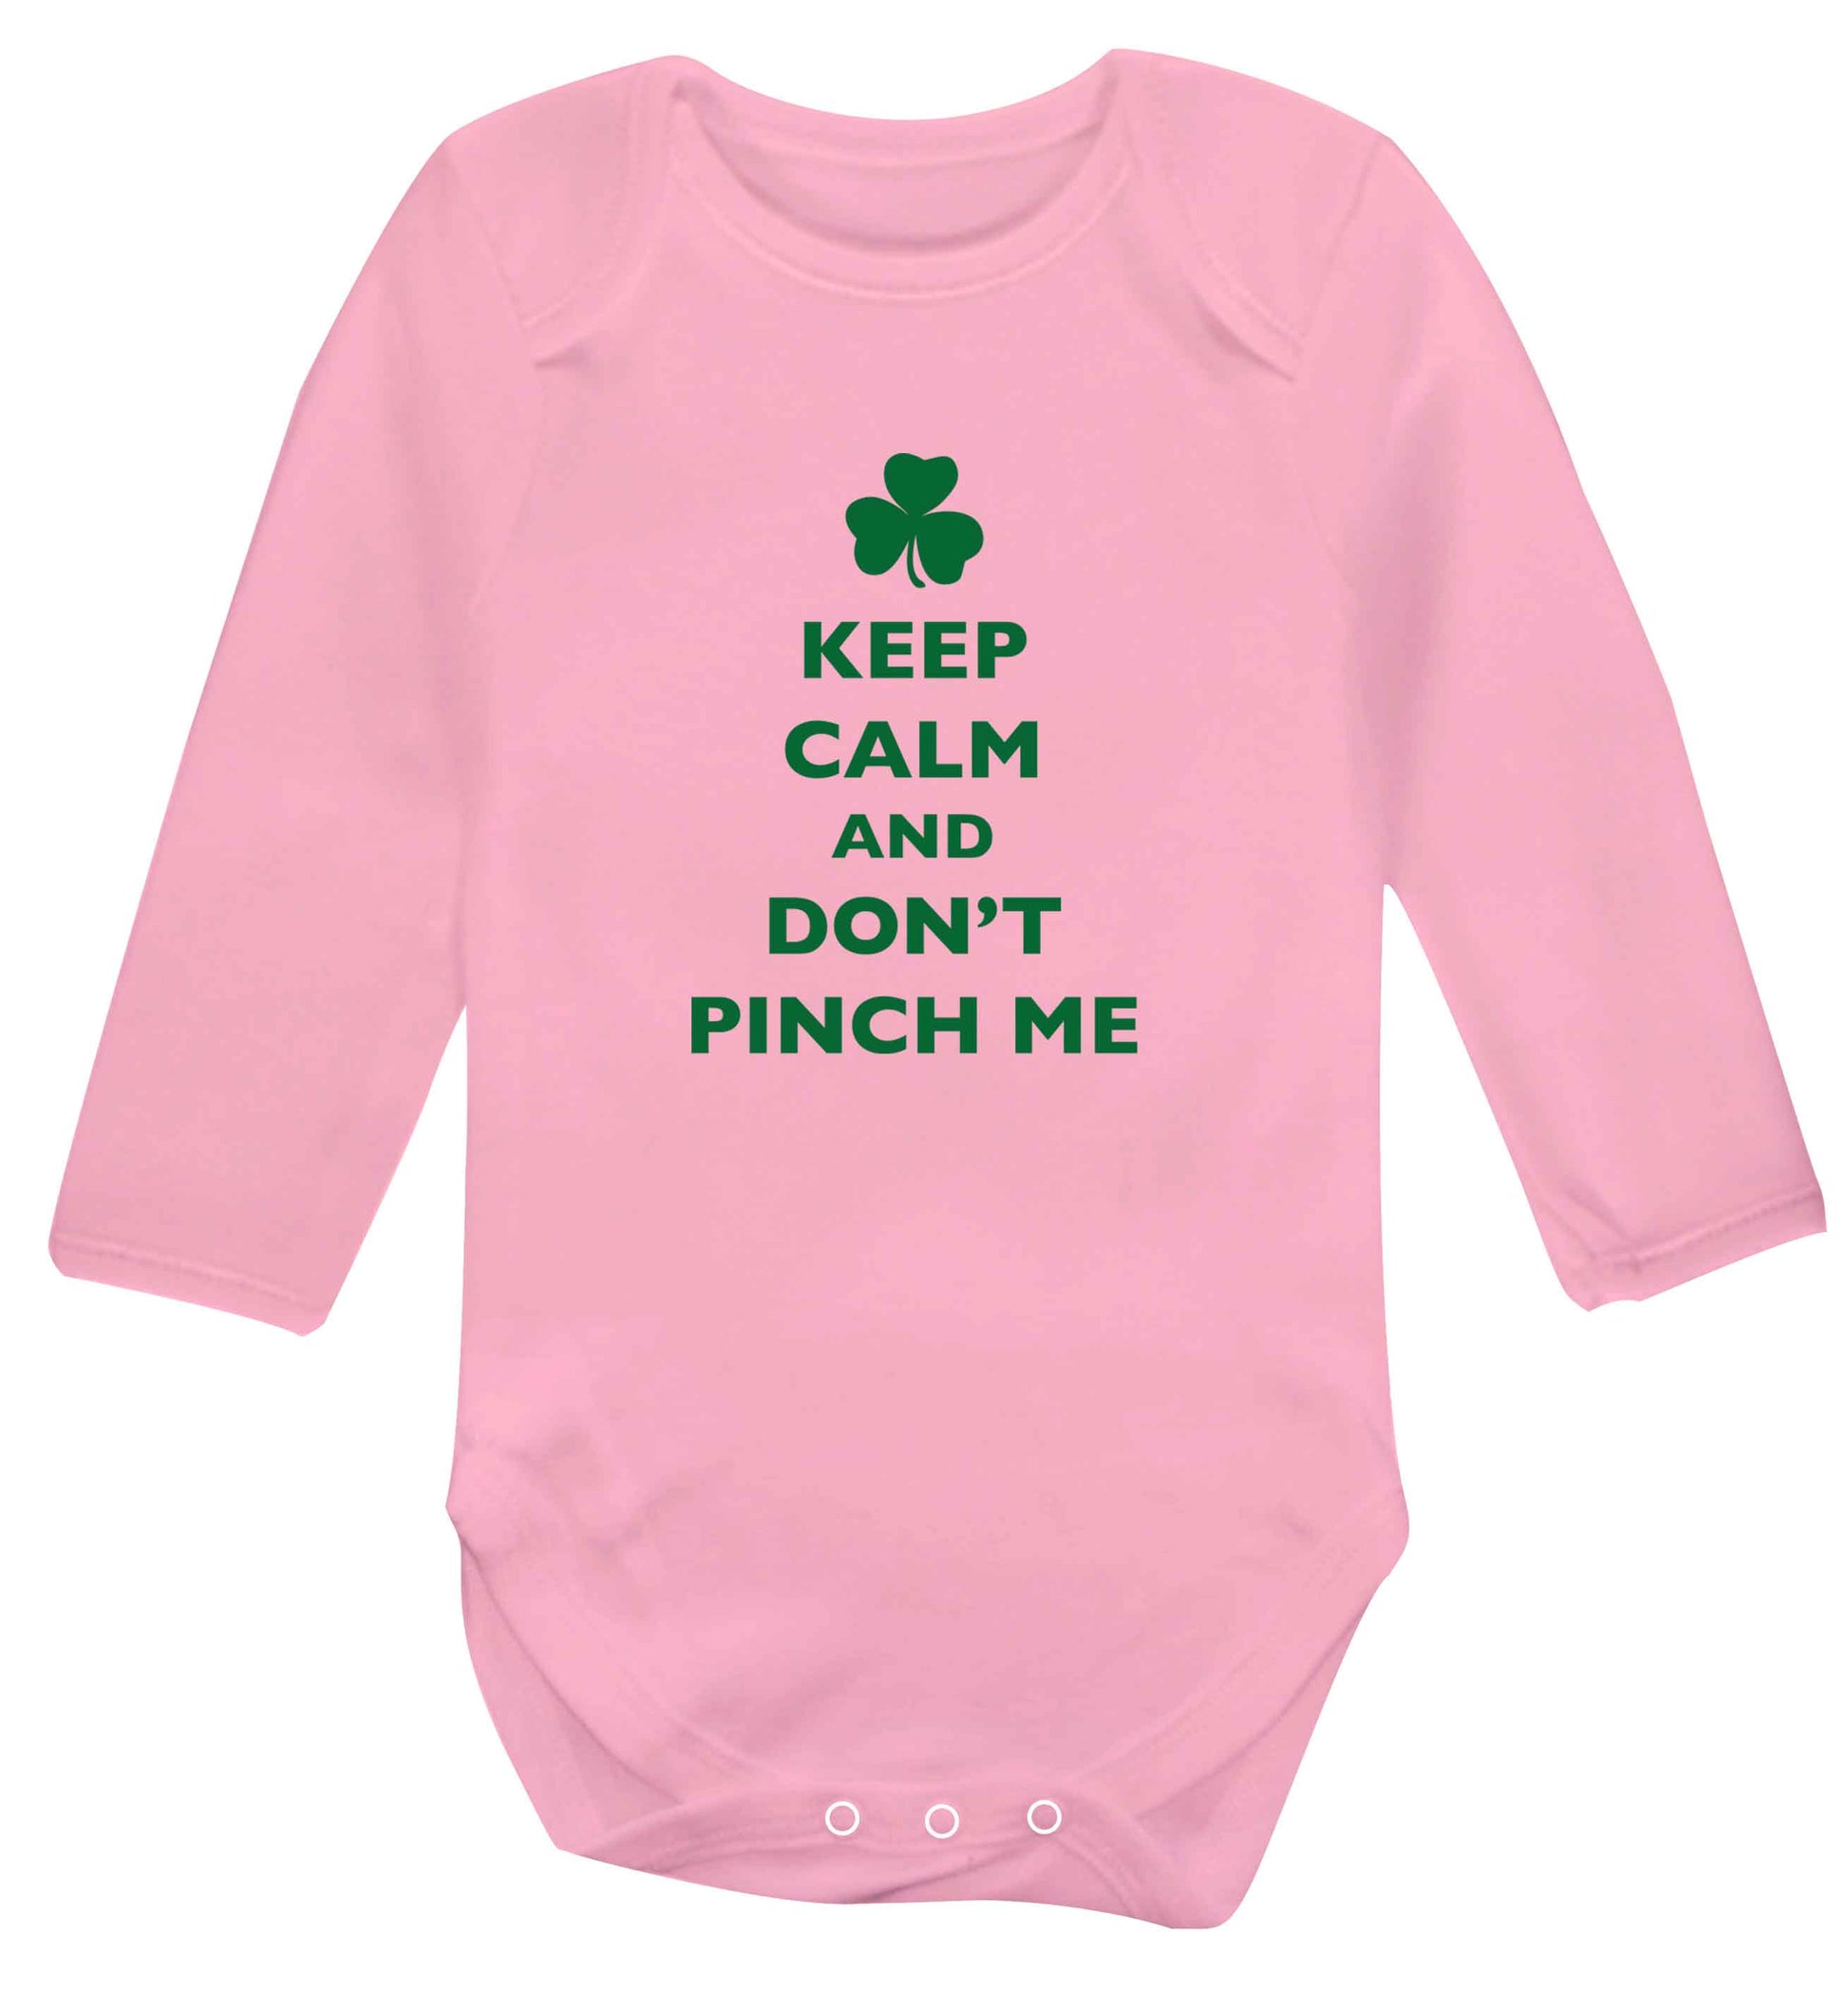 Keep calm and don't pinch me baby vest long sleeved pale pink 6-12 months